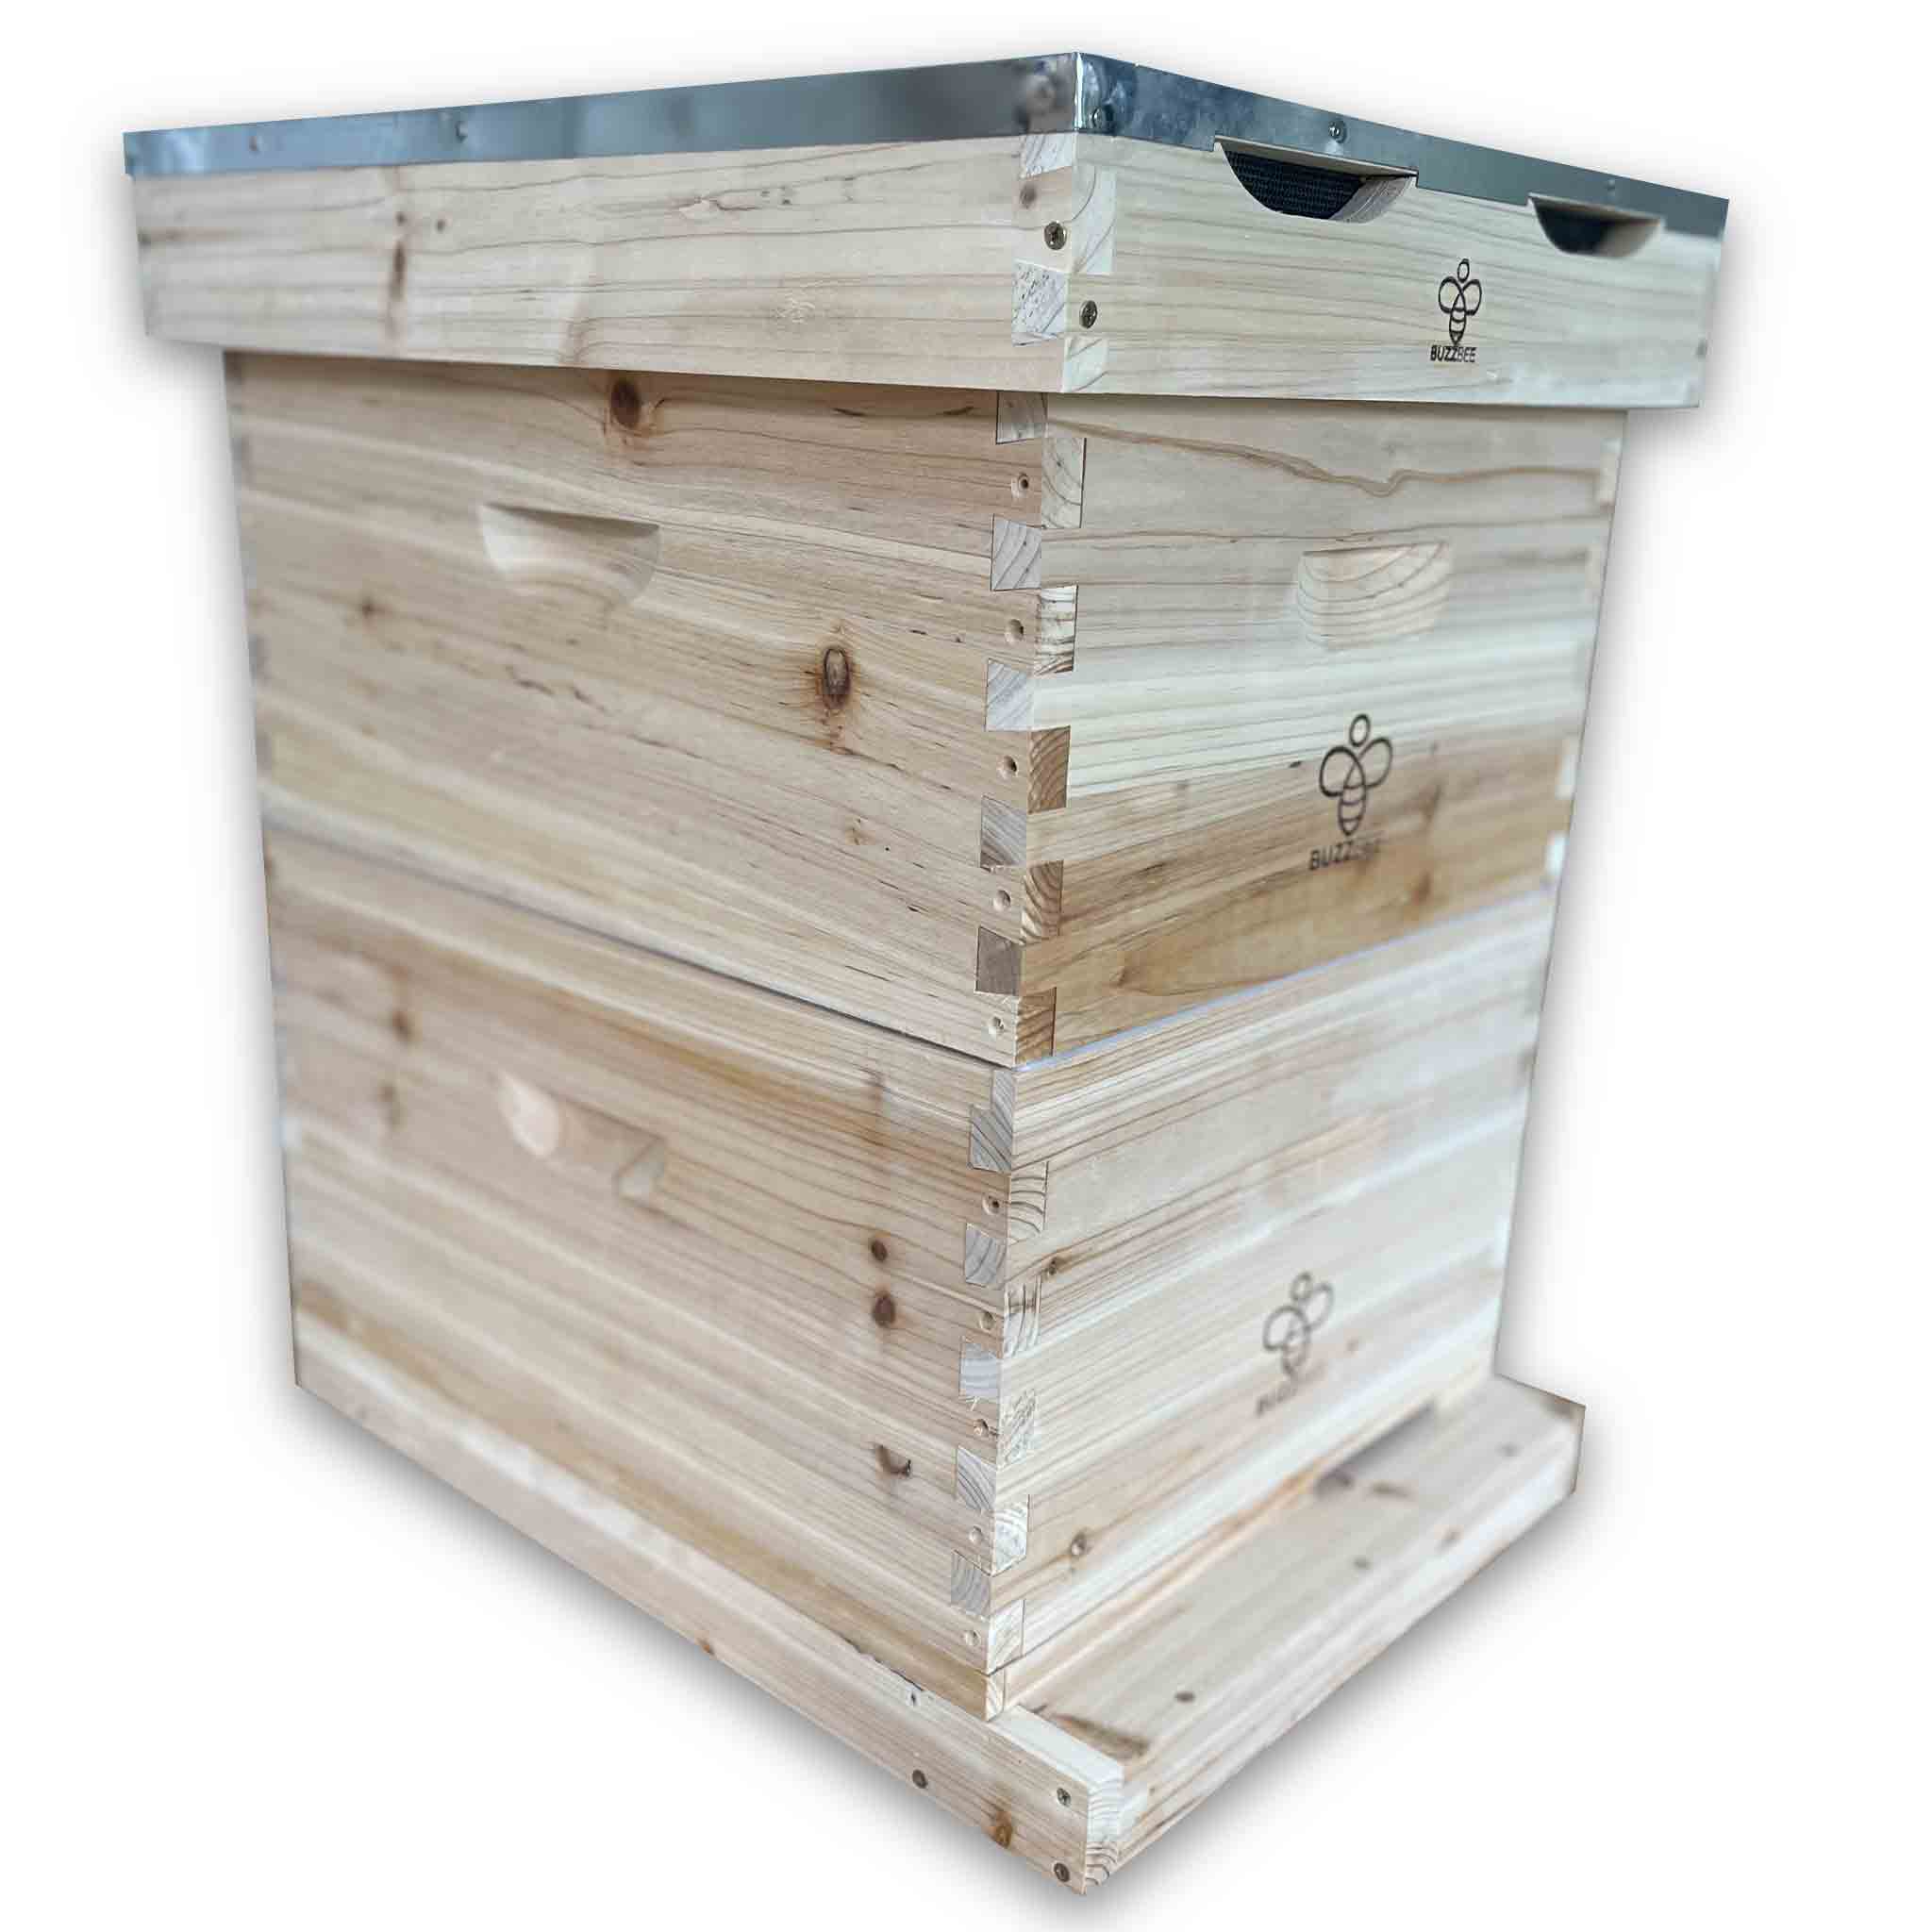 Langstroth Beehive (8 or 10 Frames) - Hives collection by Buzzbee Beekeeping Supplies